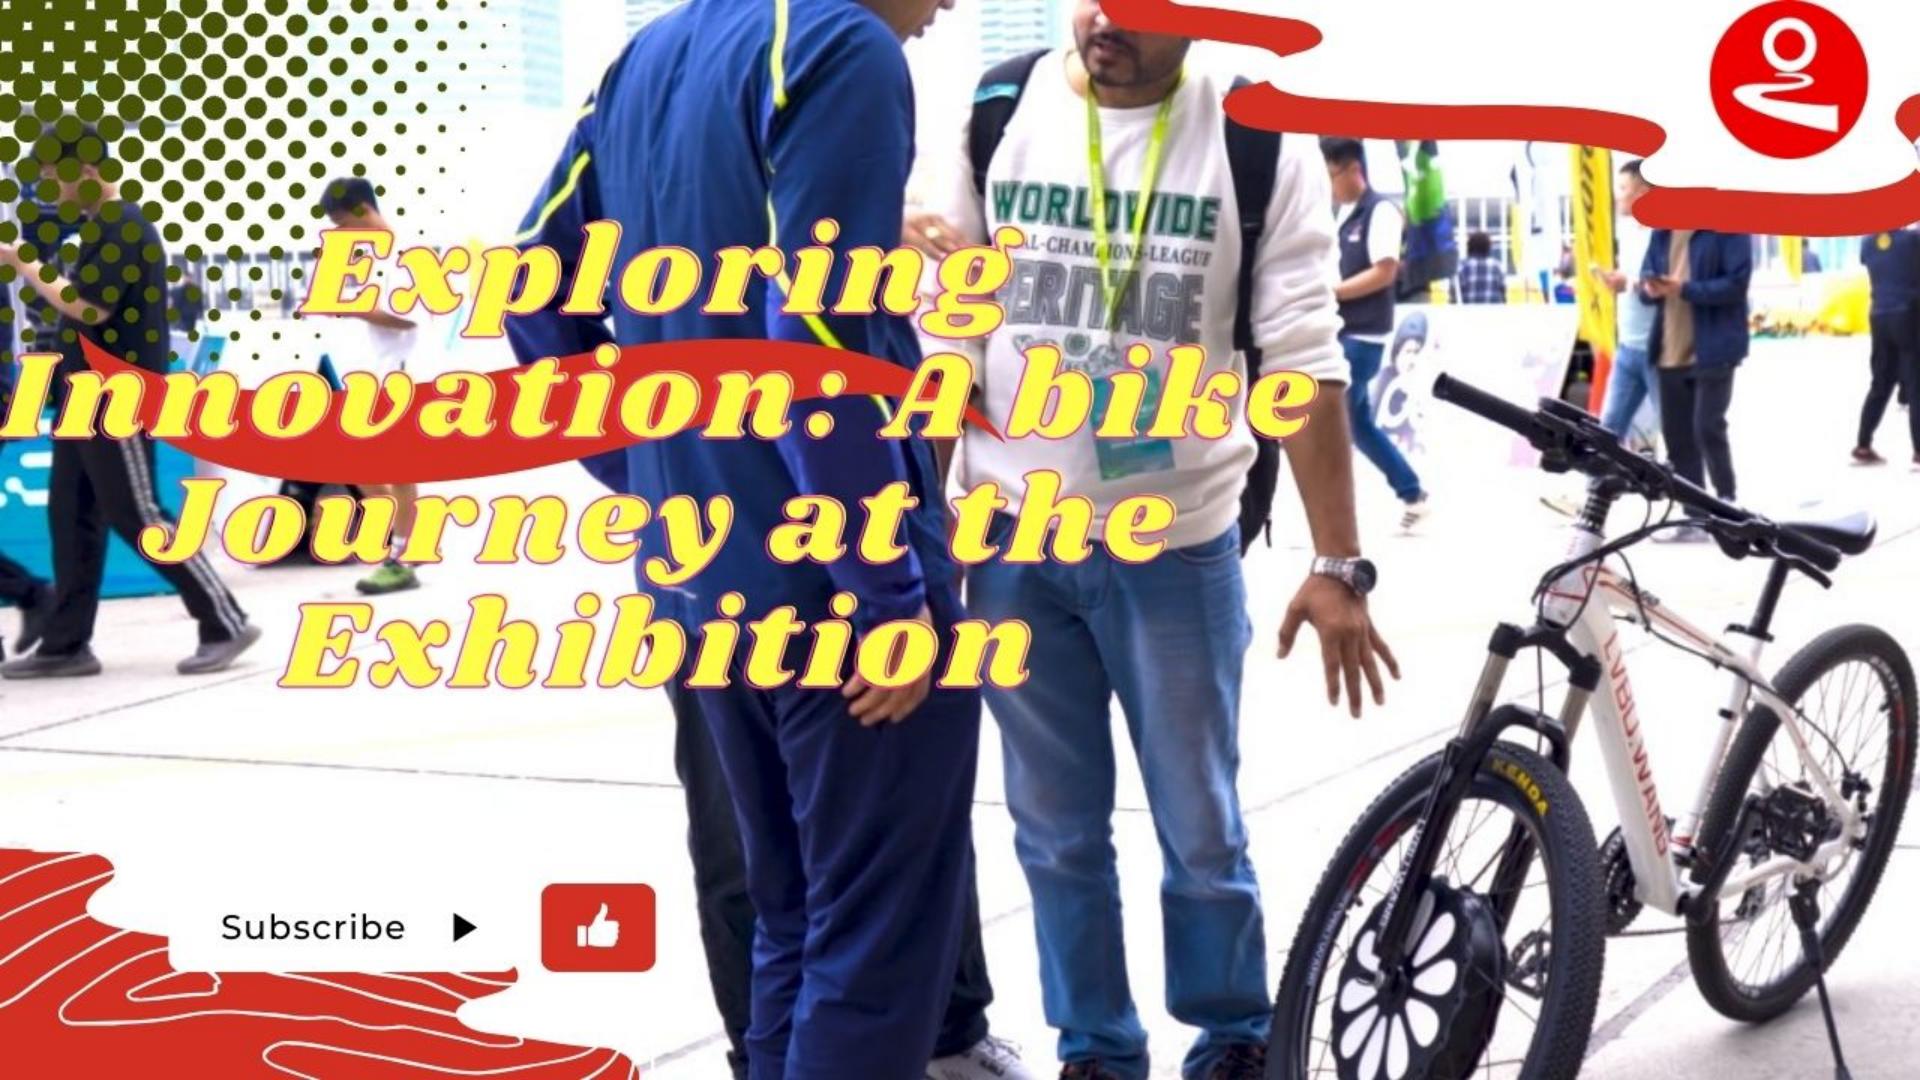 Exploring Innovation: A bike Journey at the Exhibition